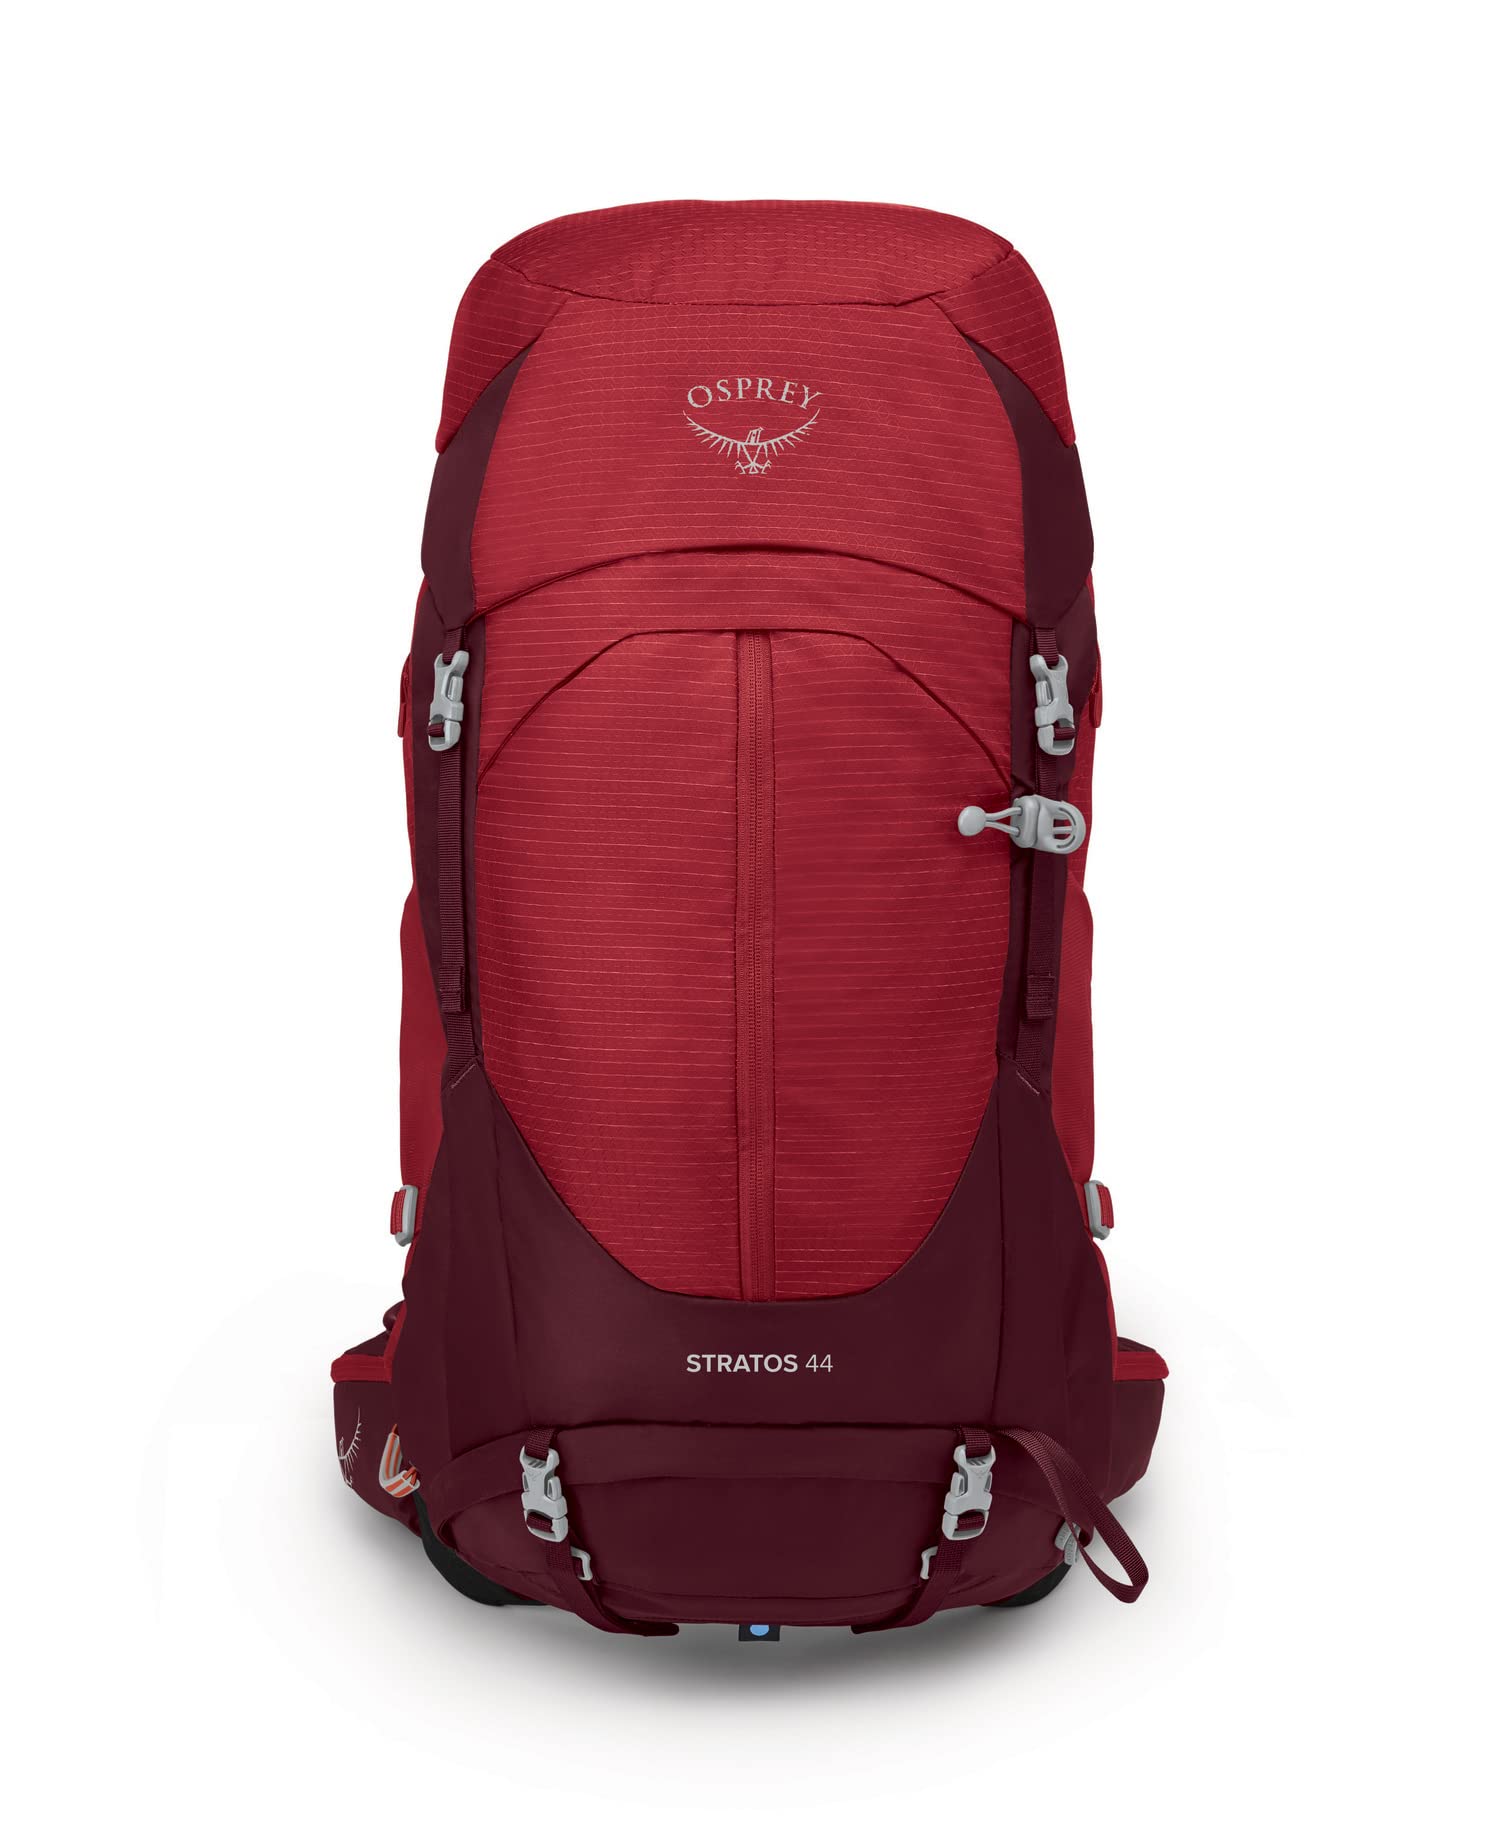 Osprey Stratos 44L Men's Hiking Backpack, Poinsettia Red